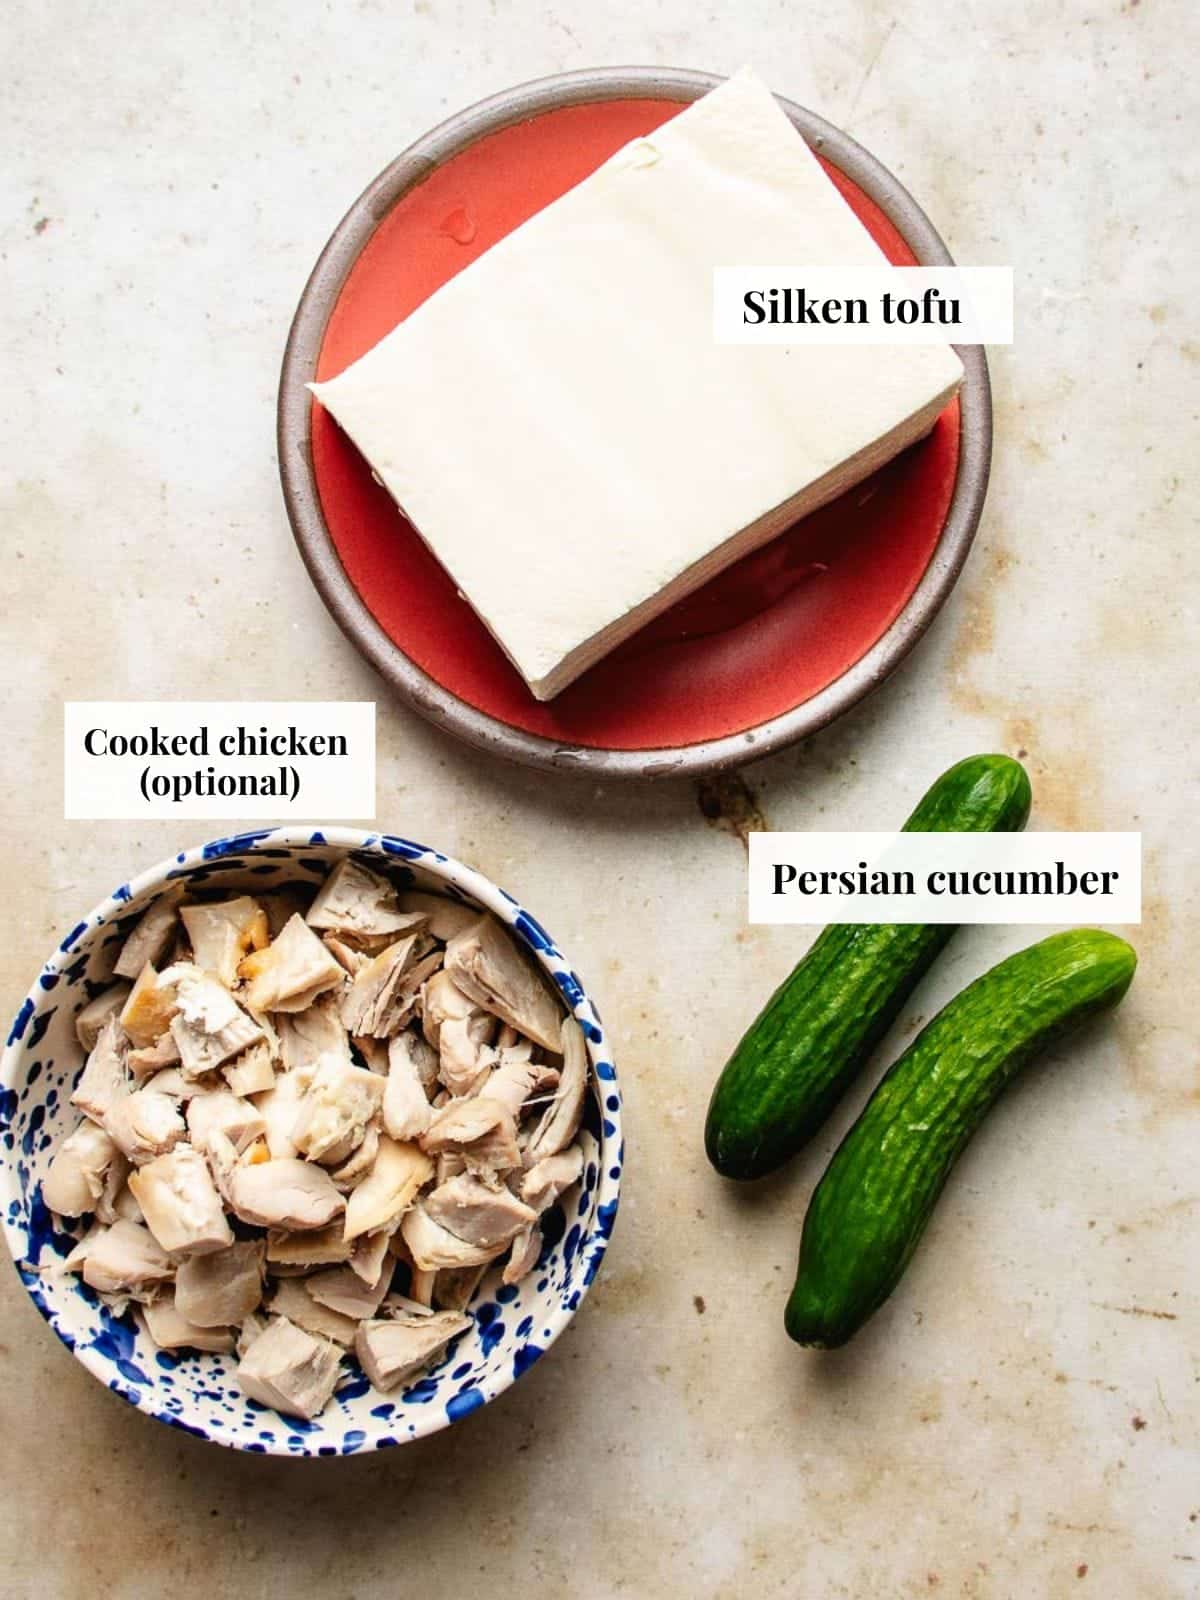 Photo shows ingredients needed to assemble the silken tofu dish.